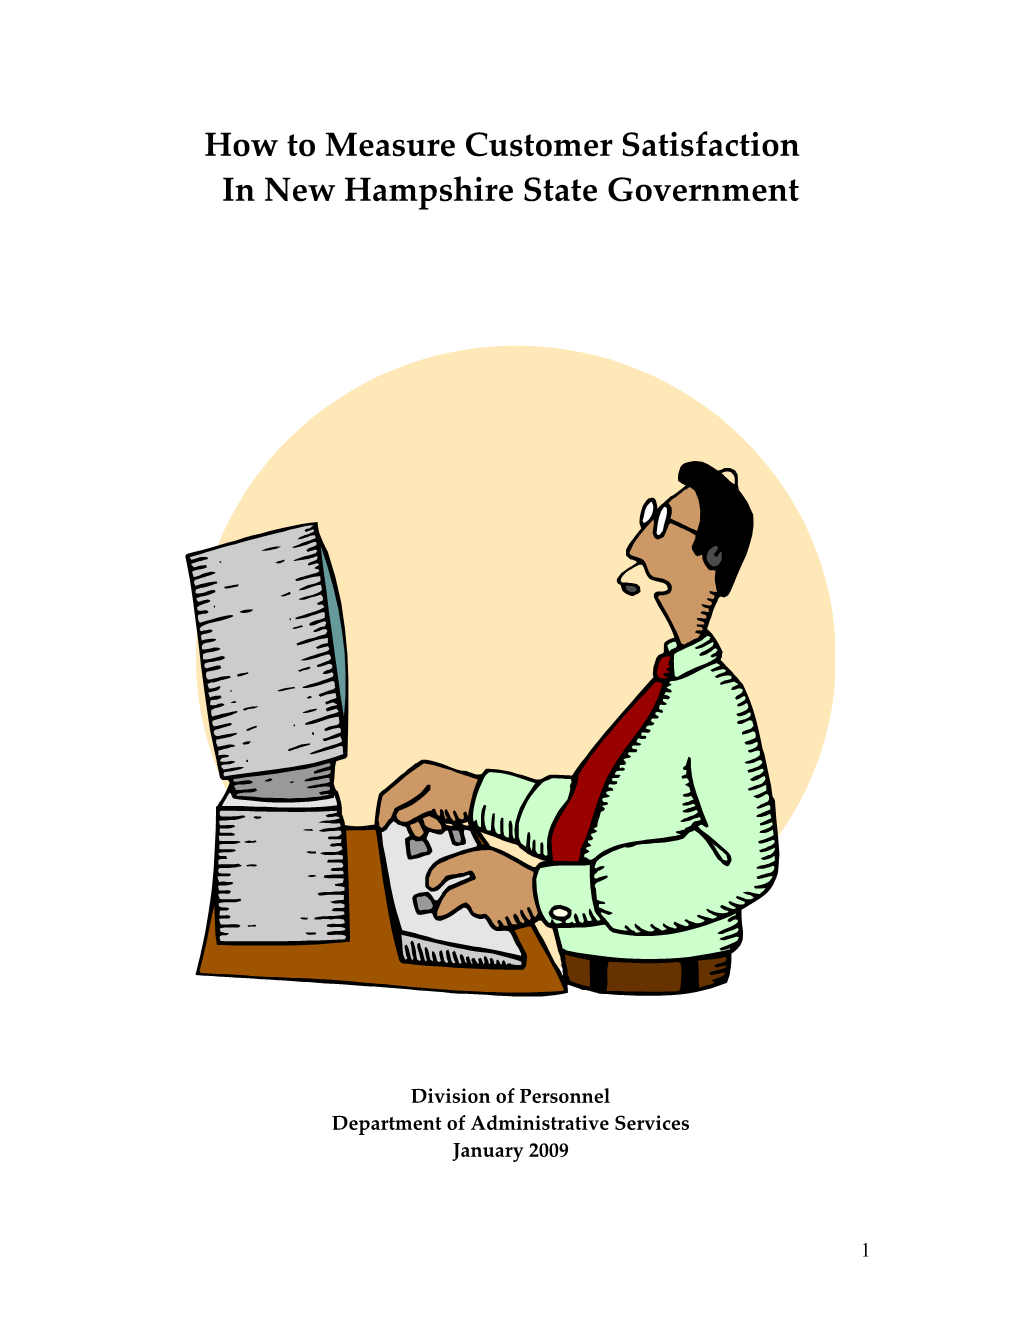 How to Measure Customer Satisfaction in New Hampshire State Government